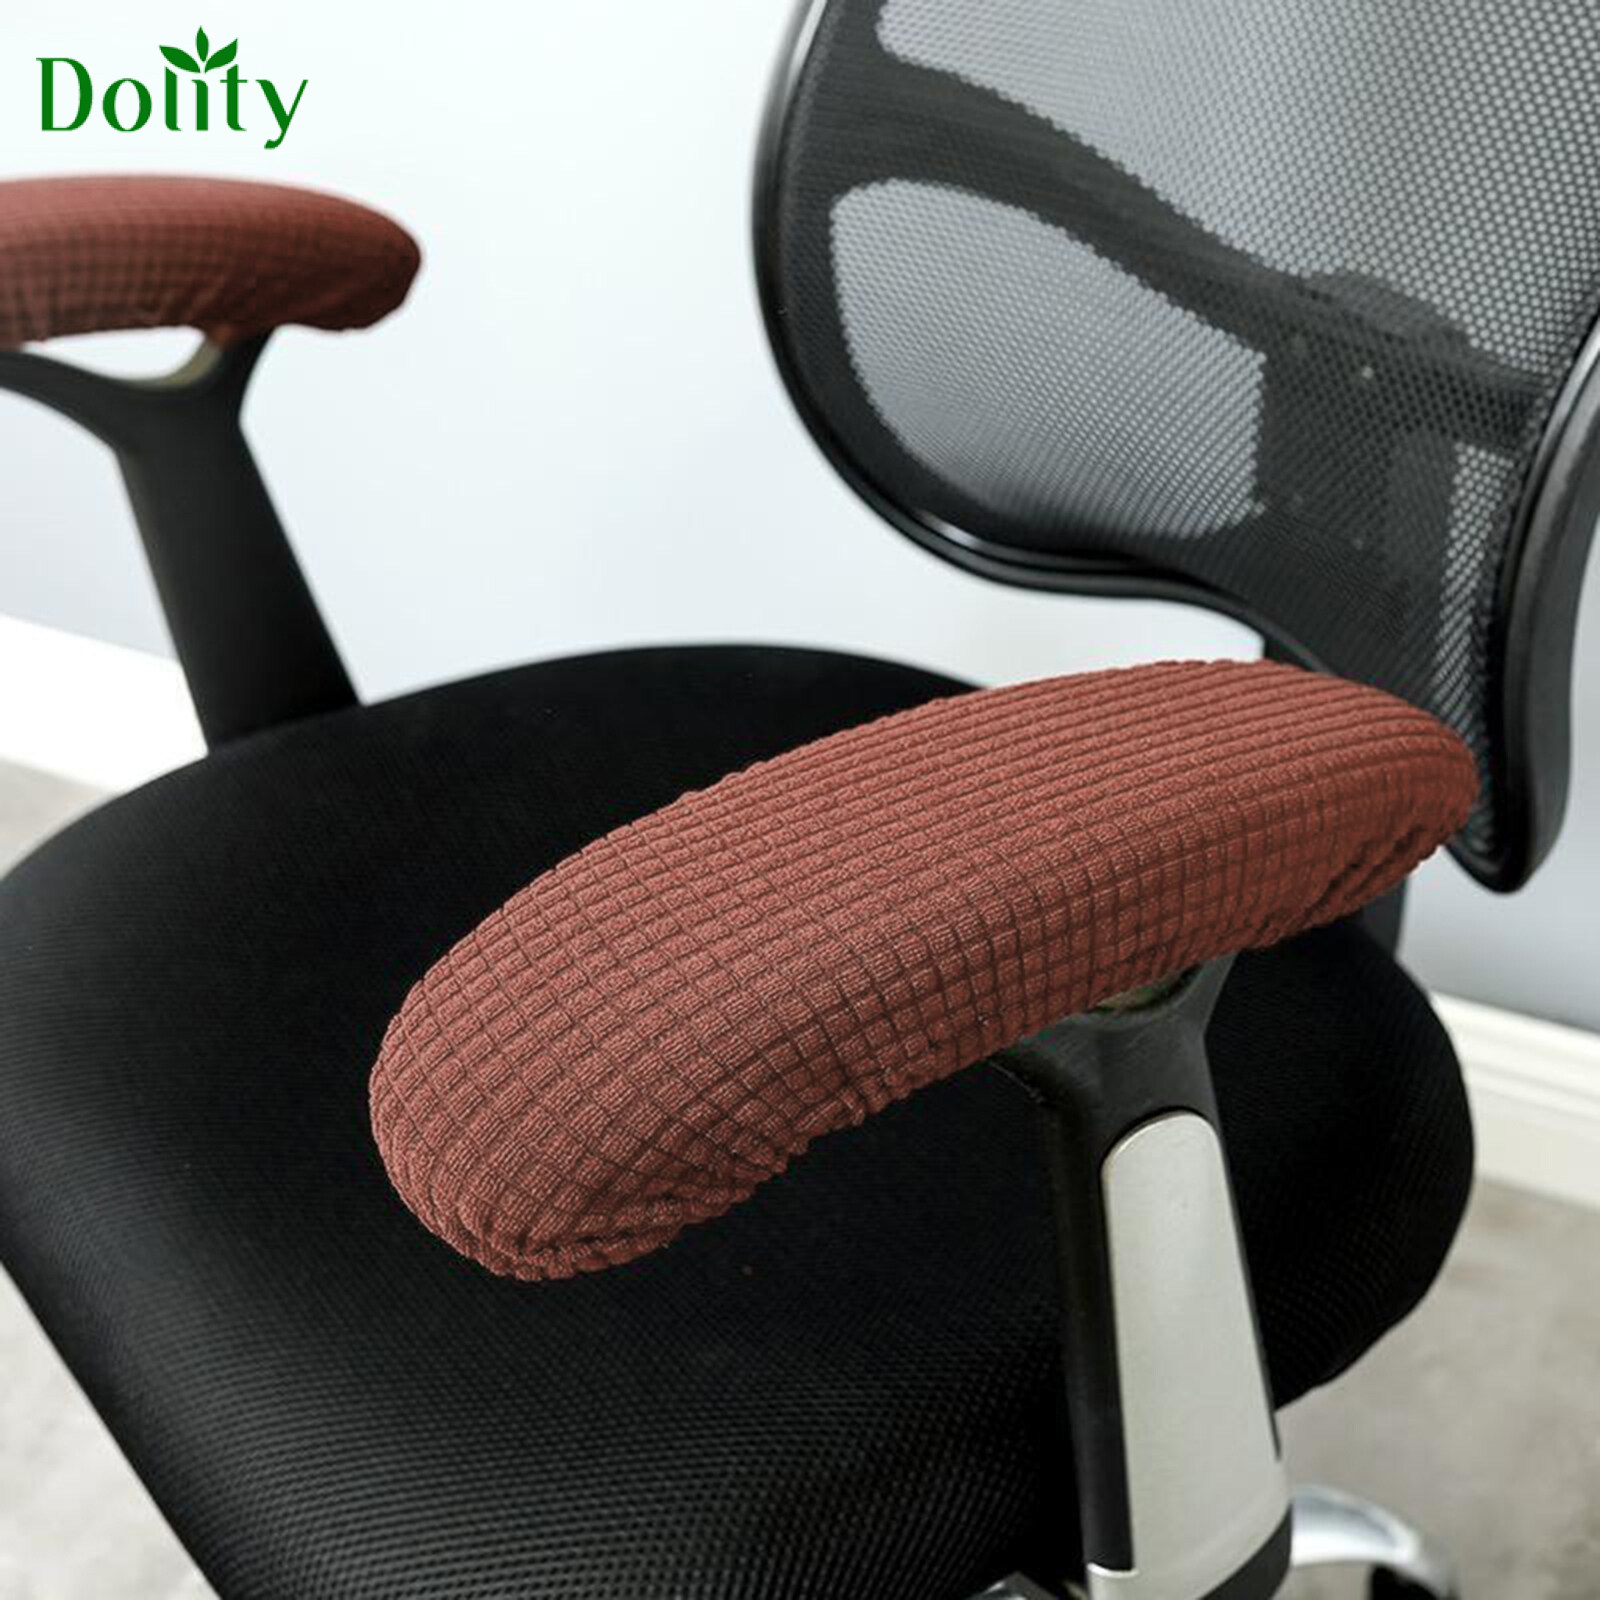 Freahap Armrest Covers for Office Chair Elastic Fabric Universal Armrest Protector for Desk Gaming Chair 1 Pair Coffee 